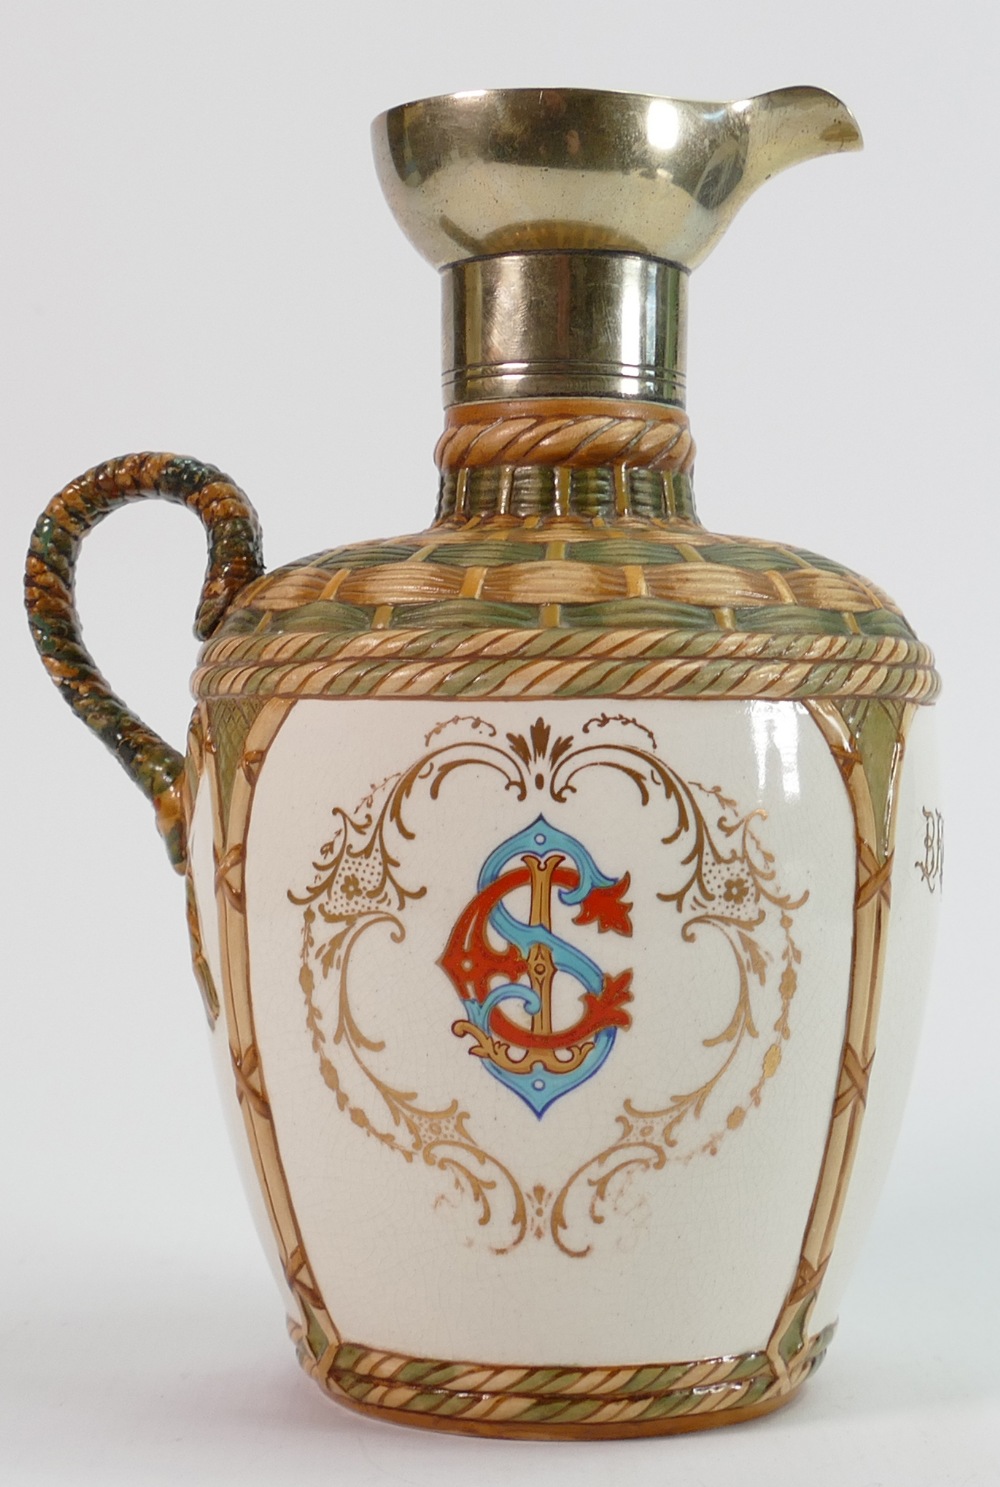 19th century Taylor Tunnicliffe Brandy decanter: Decorated with basket ware top & handle with coat - Image 4 of 5